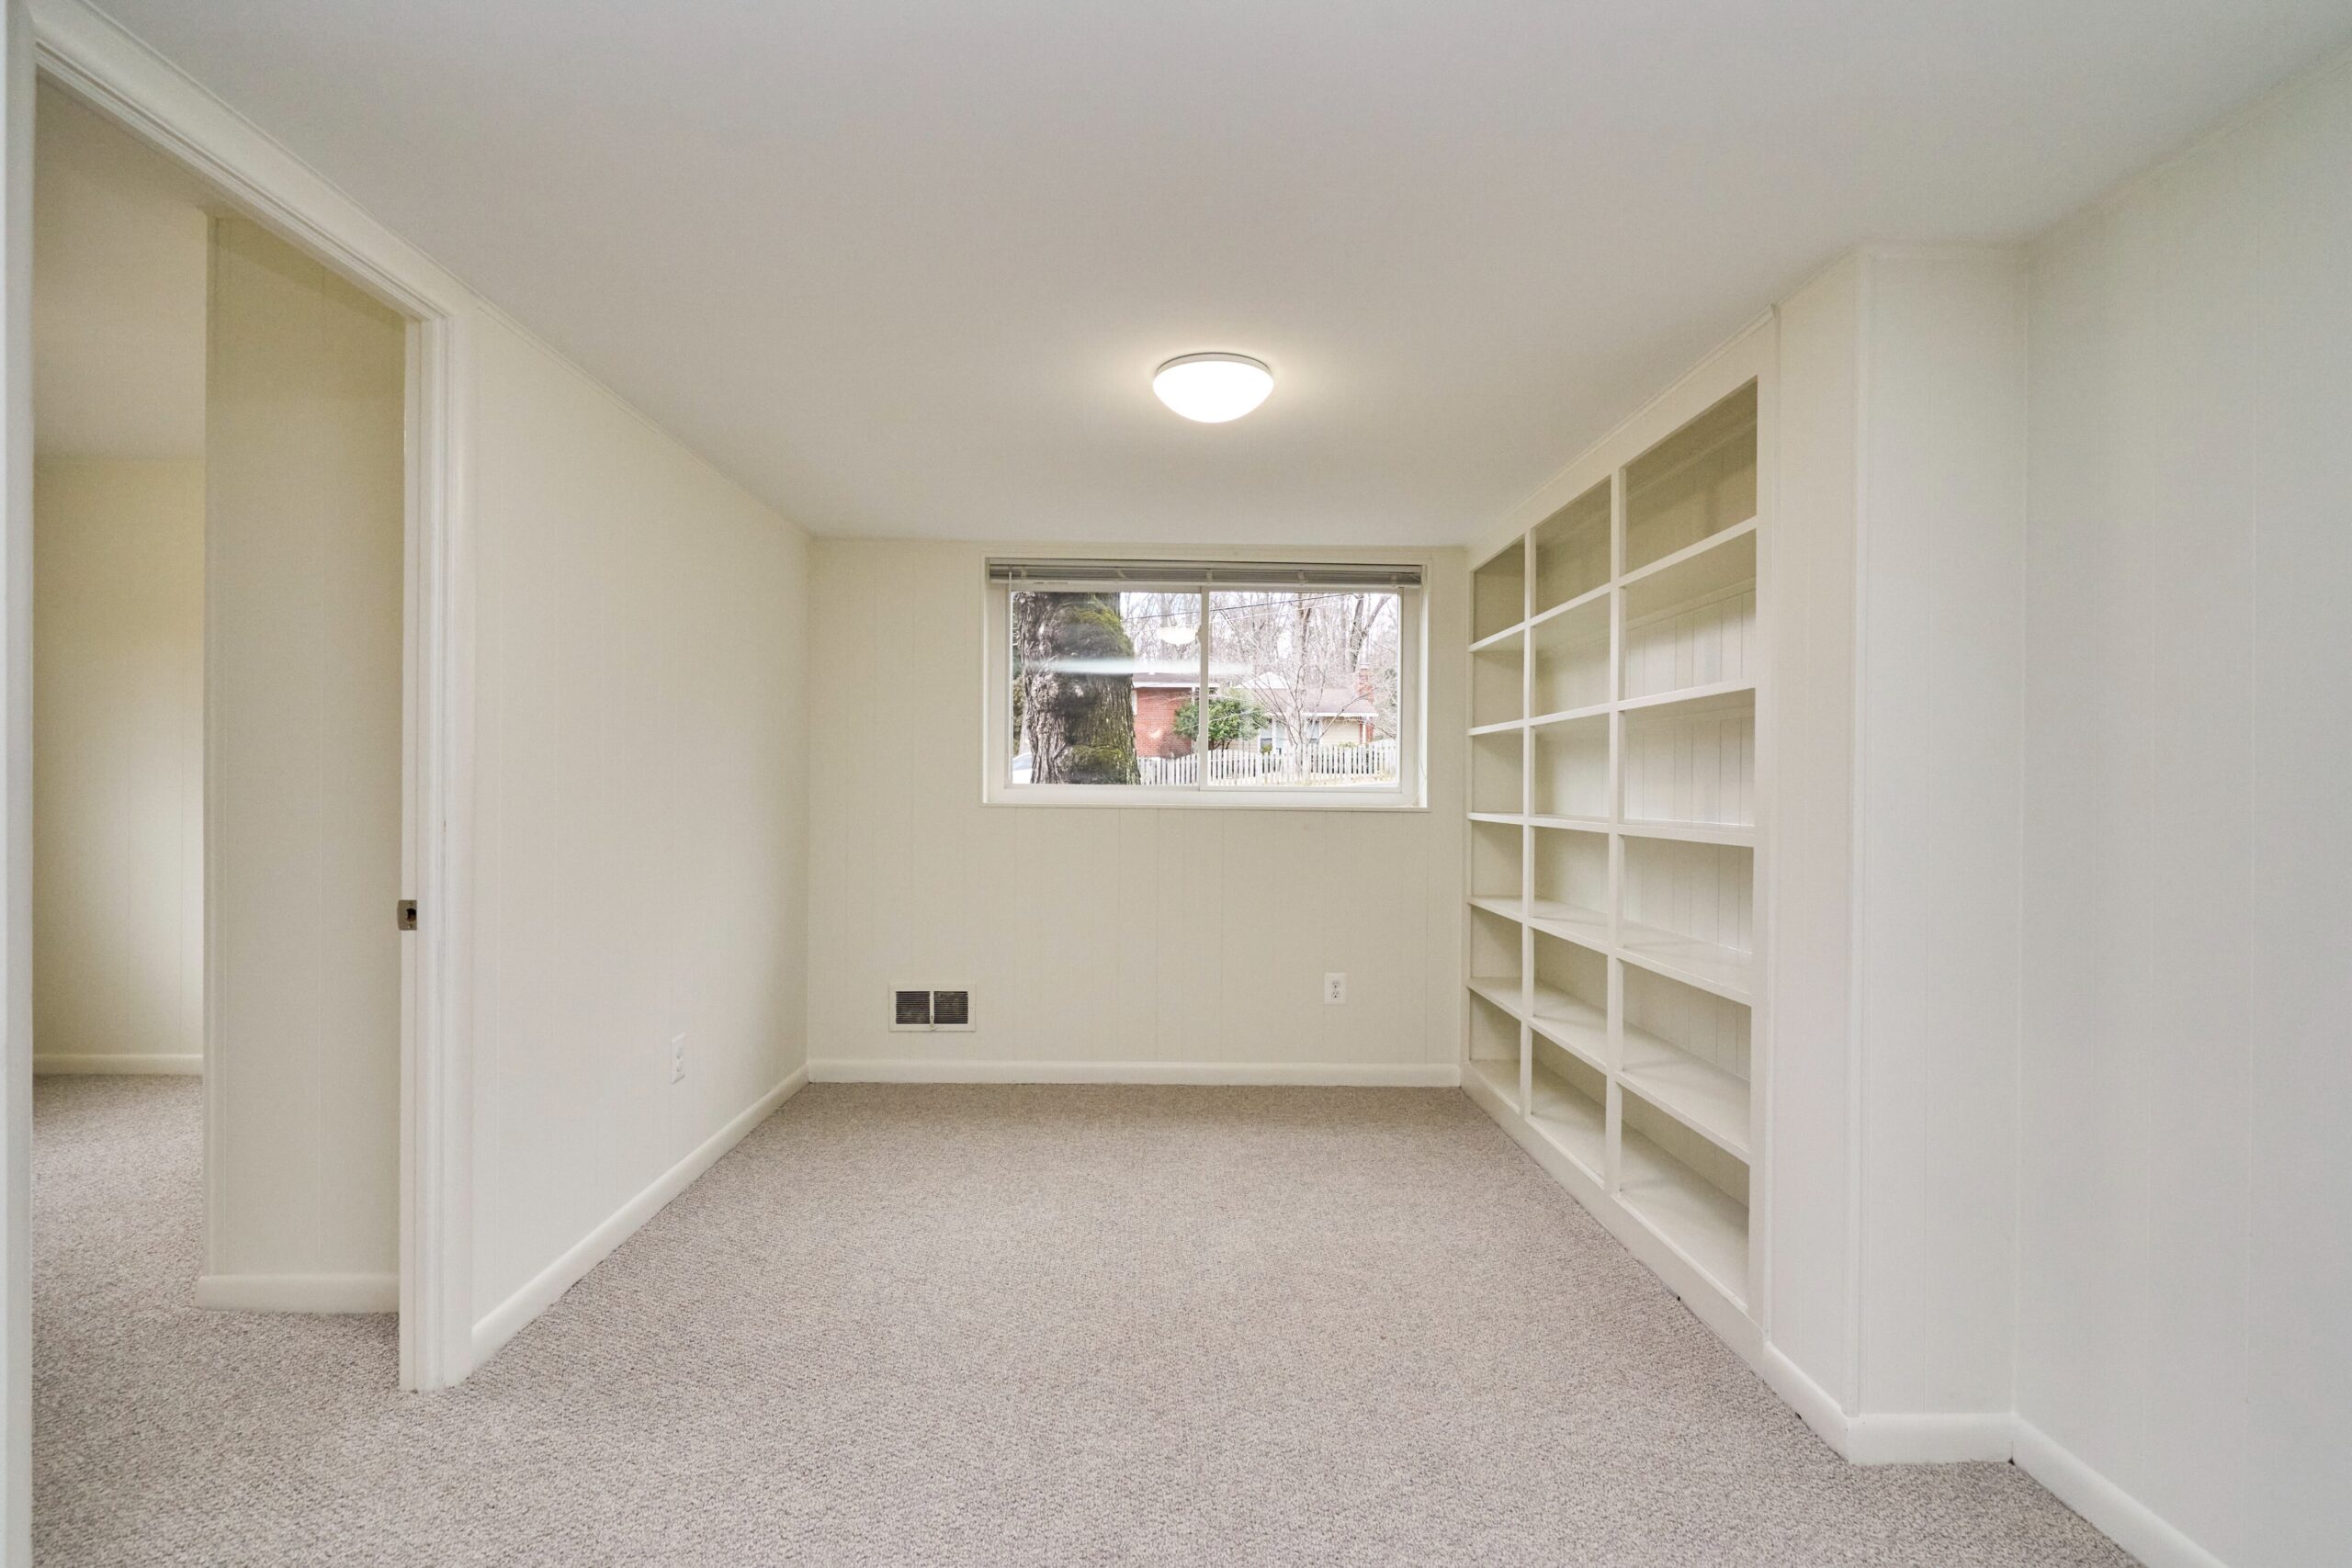 Professional interior photo of 3482 Mildred Drive in Falls Church virginia, showing a basement room with beige carpeting and built-in shelving along one wall